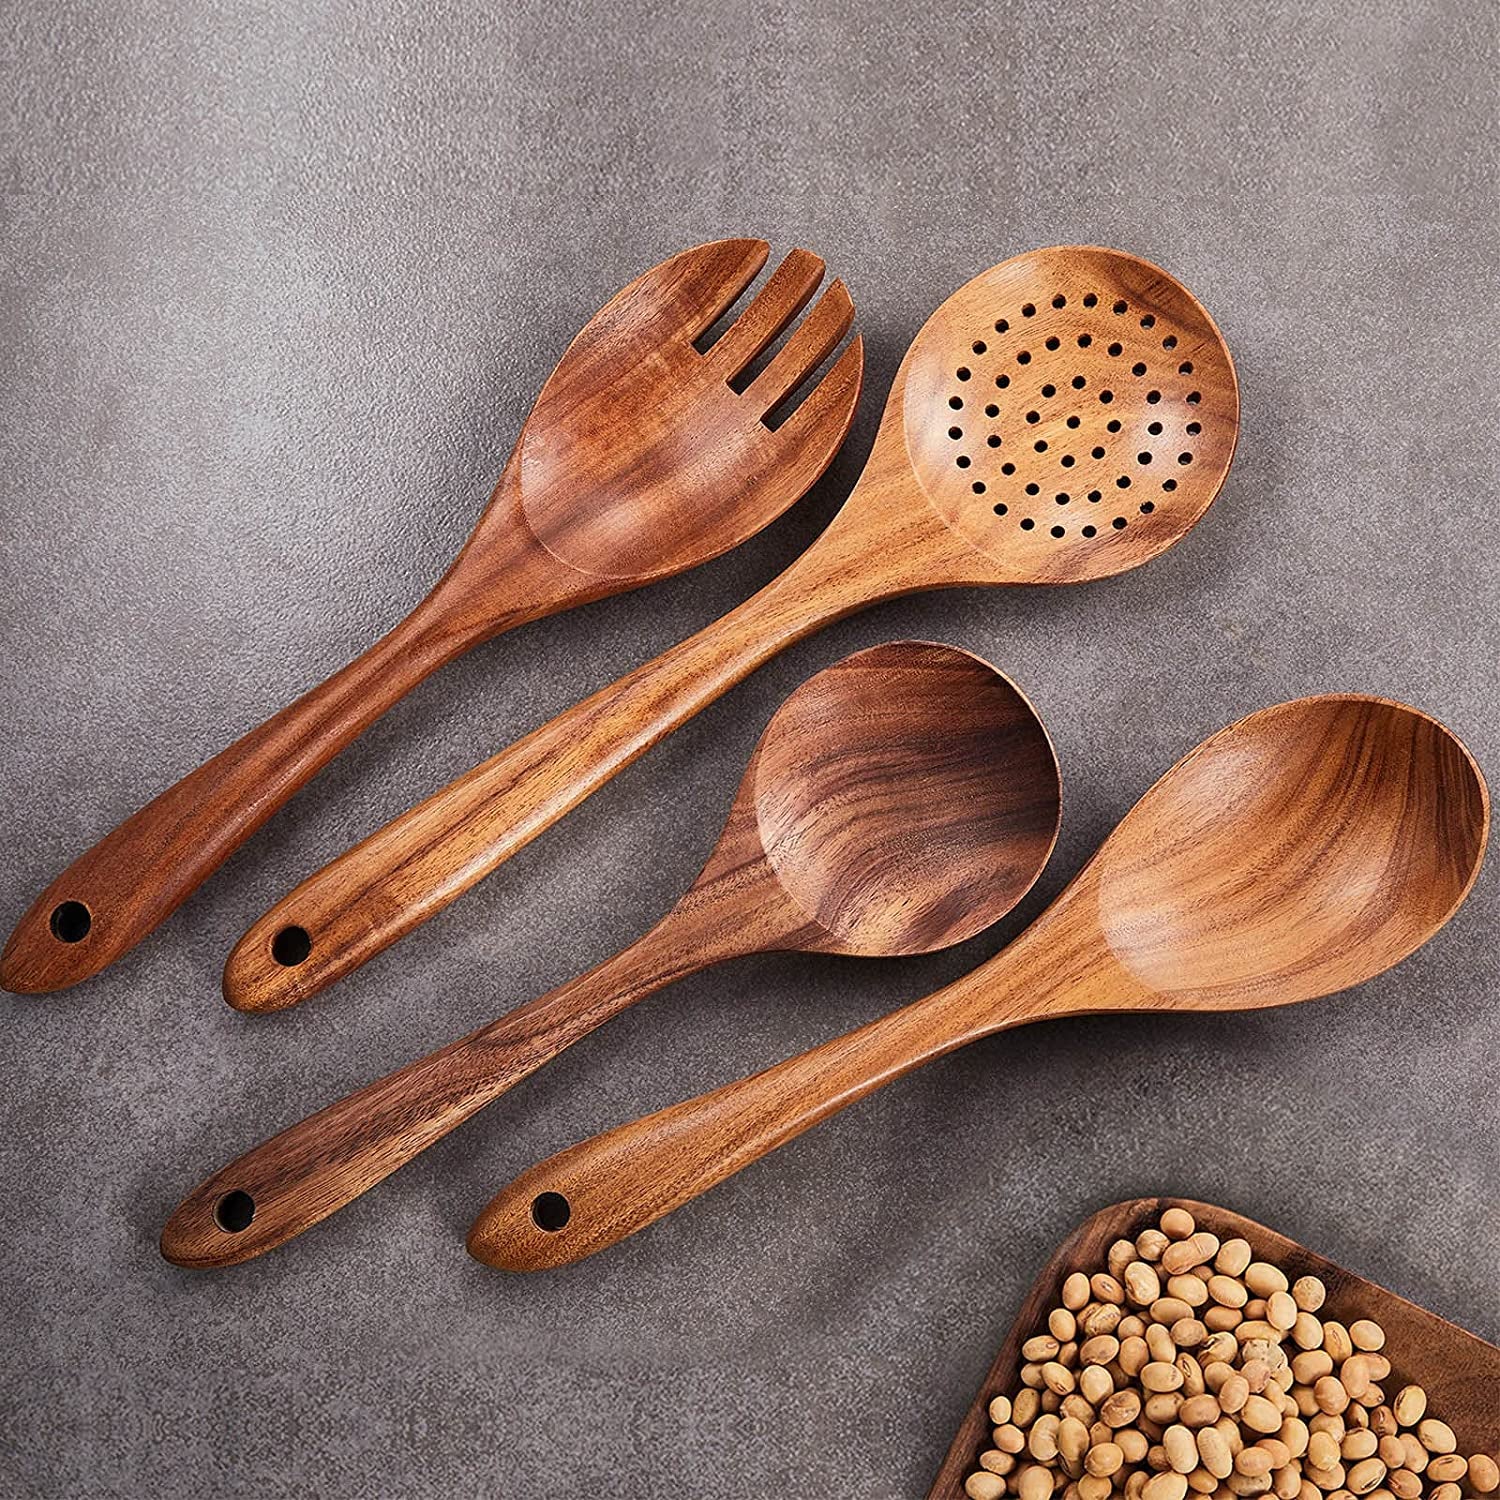 Wooden Kitchen Utensils Set, 9 PCE Natural Teak Wooden Spoons for Non-Stick Pan for Cooking,